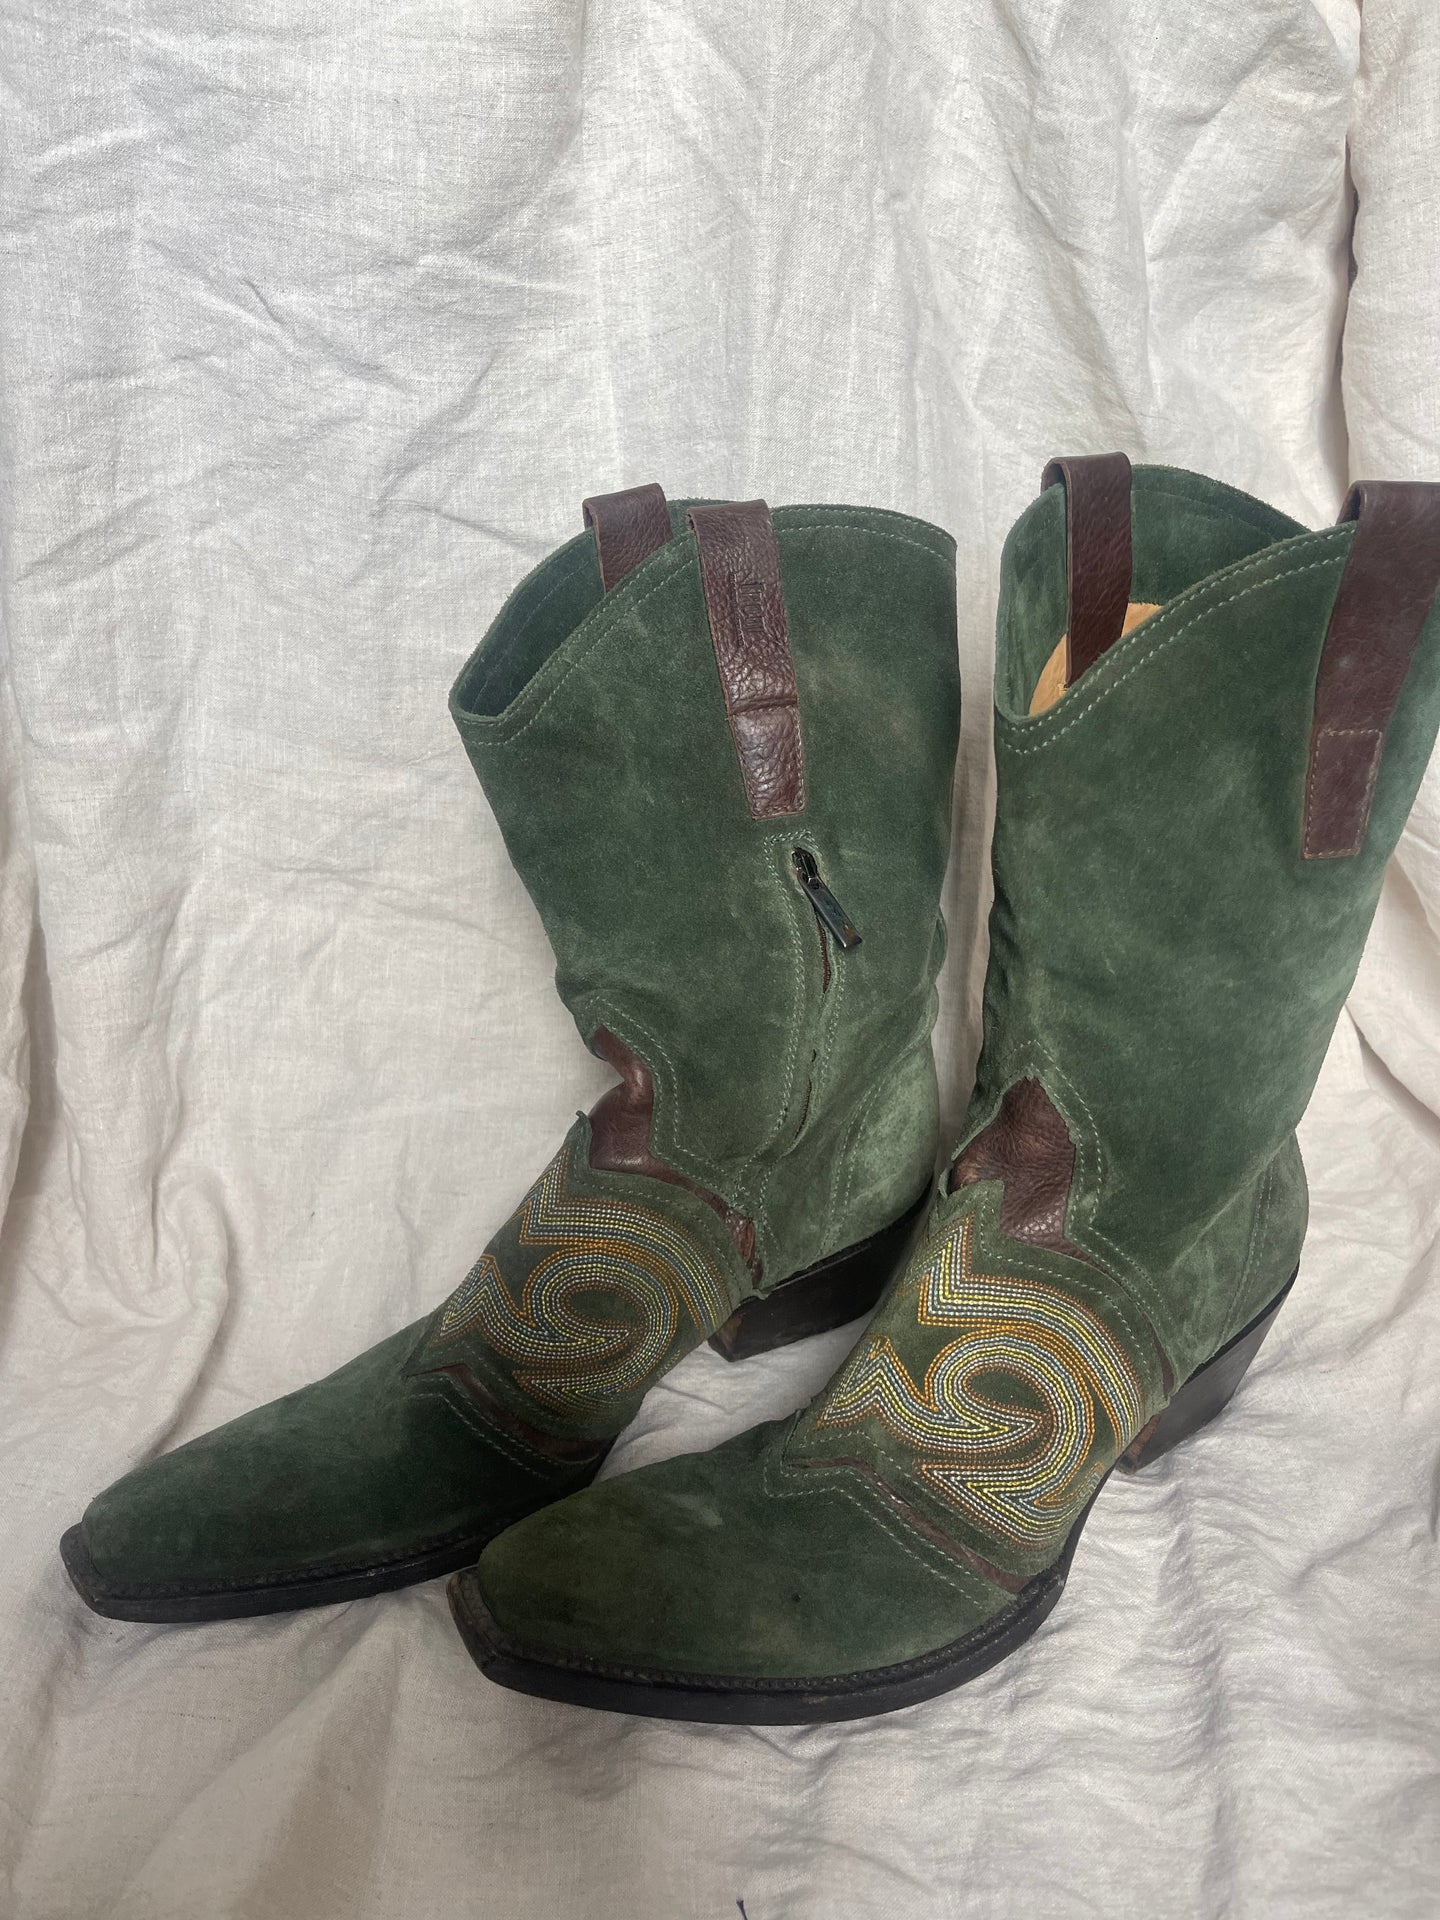 SECONDS - Green Vintage Suede Boots - 40